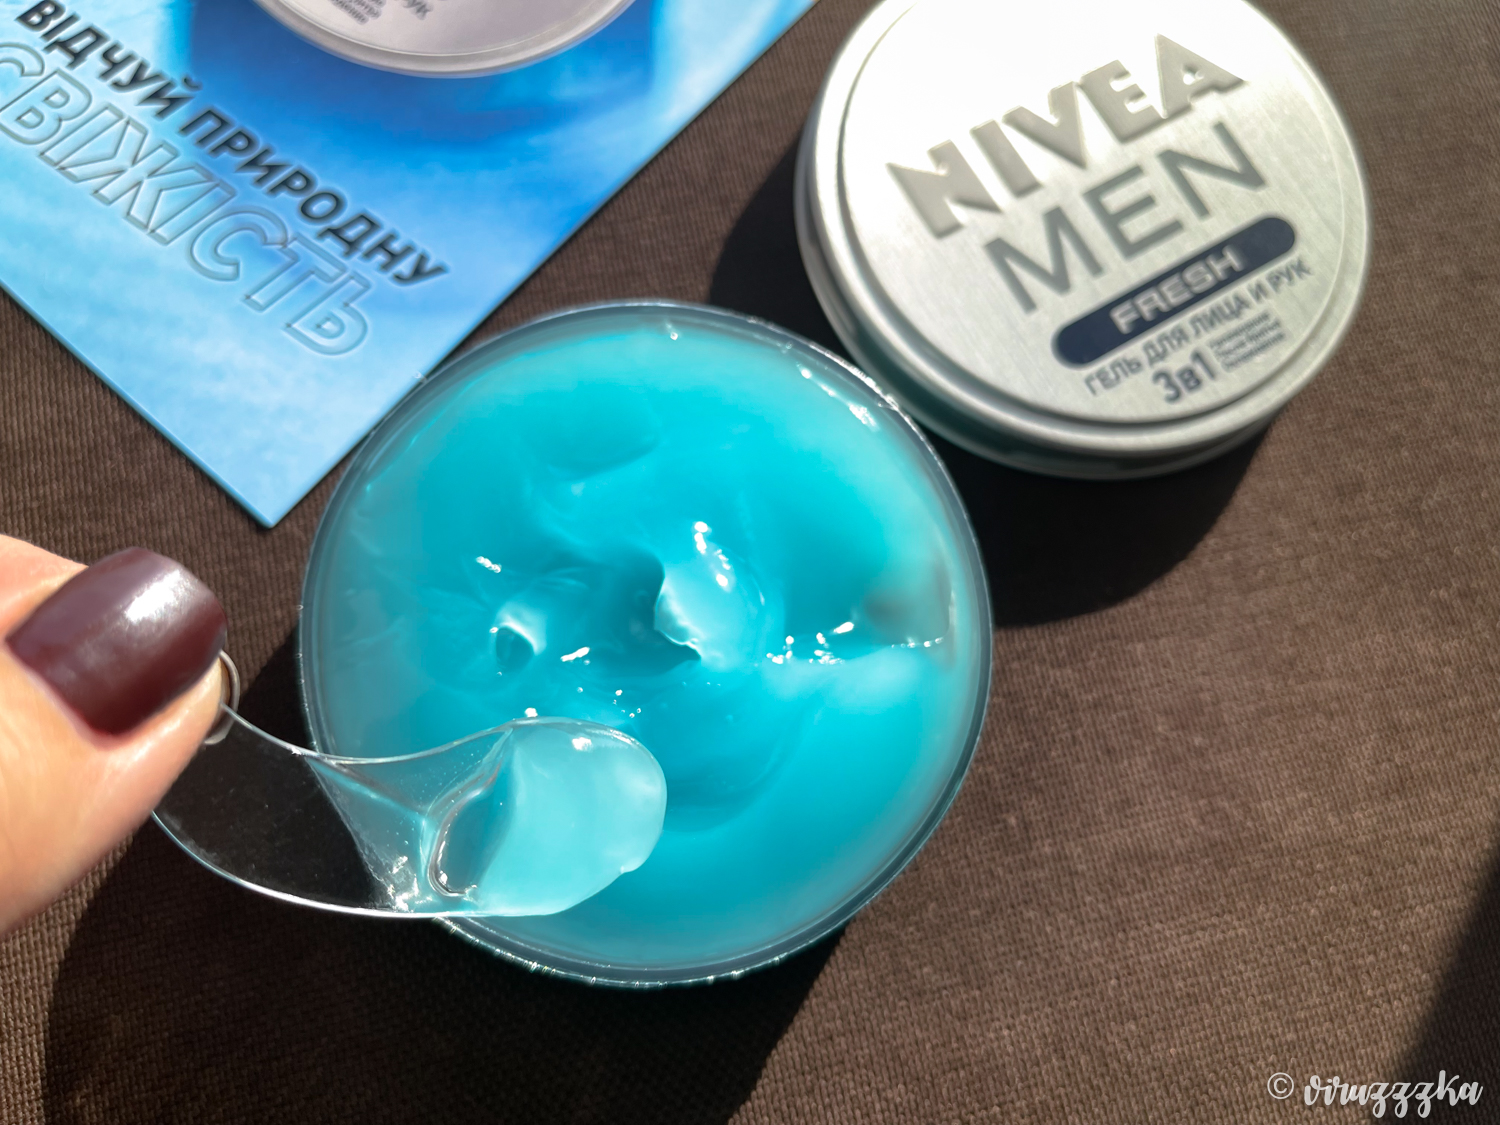 nivea men fresh gel for face and body 3 in 1 review